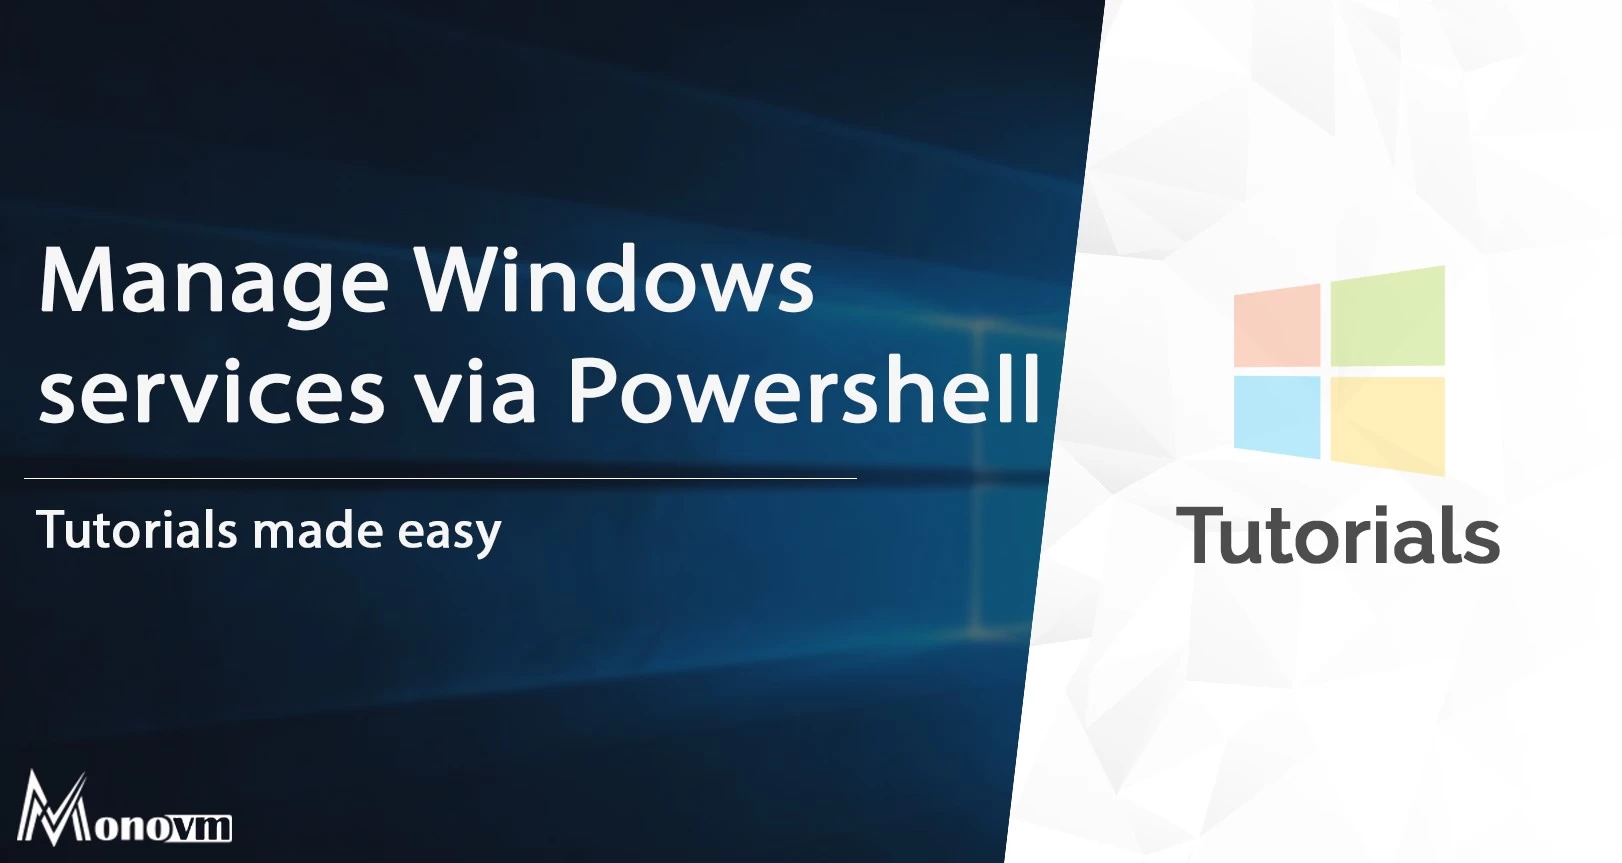 Managing Windows services with PowerShell